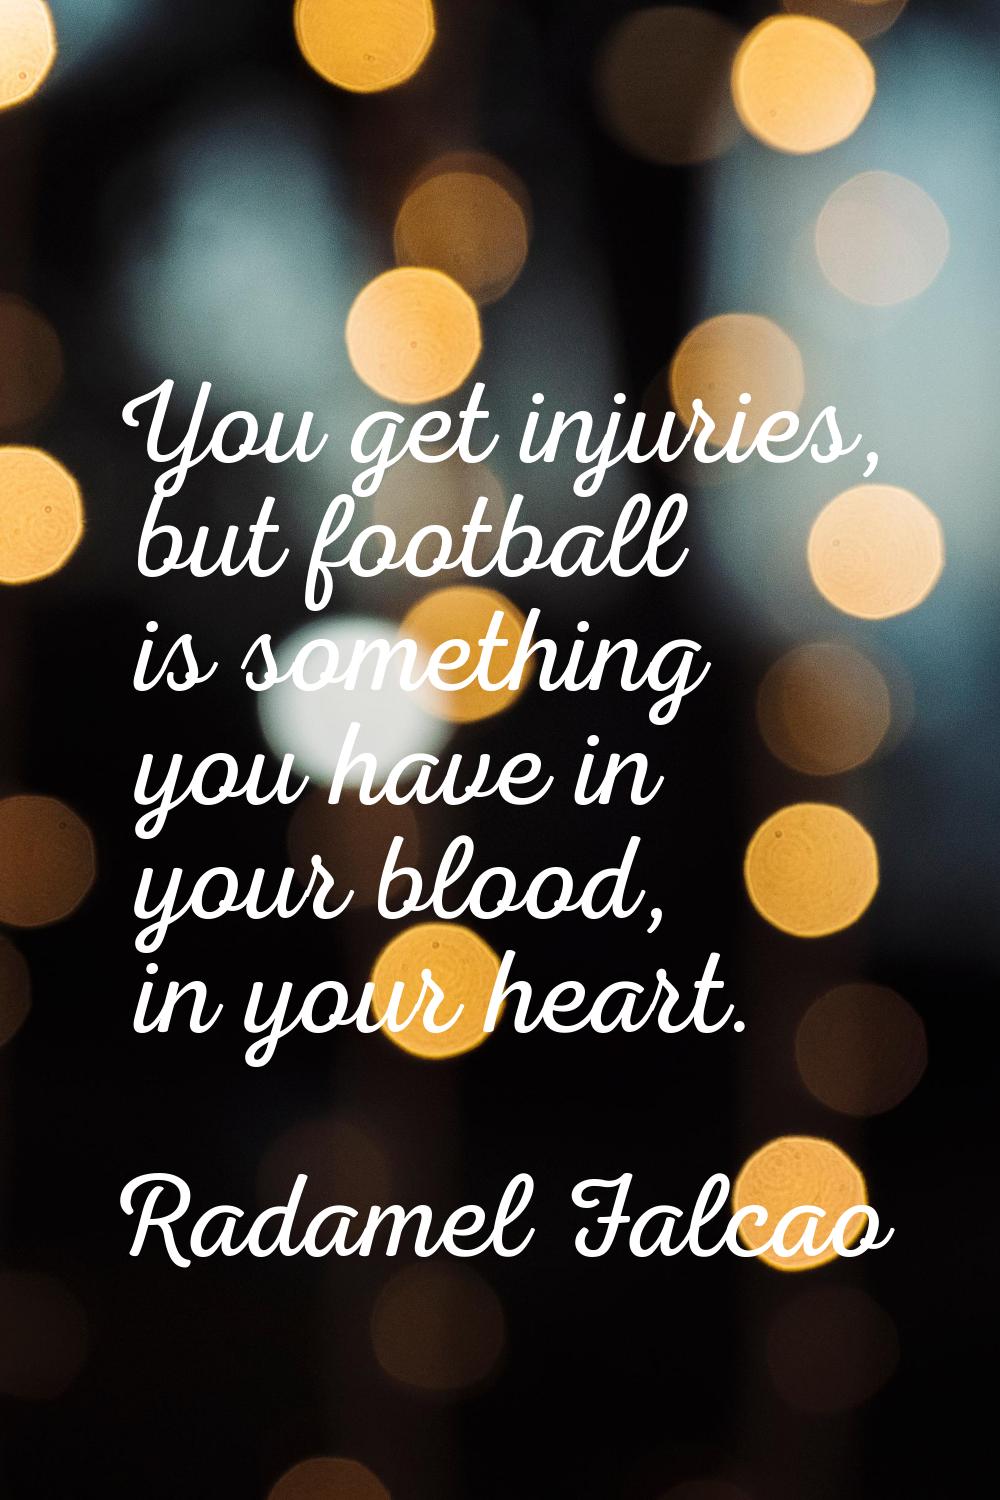 You get injuries, but football is something you have in your blood, in your heart.